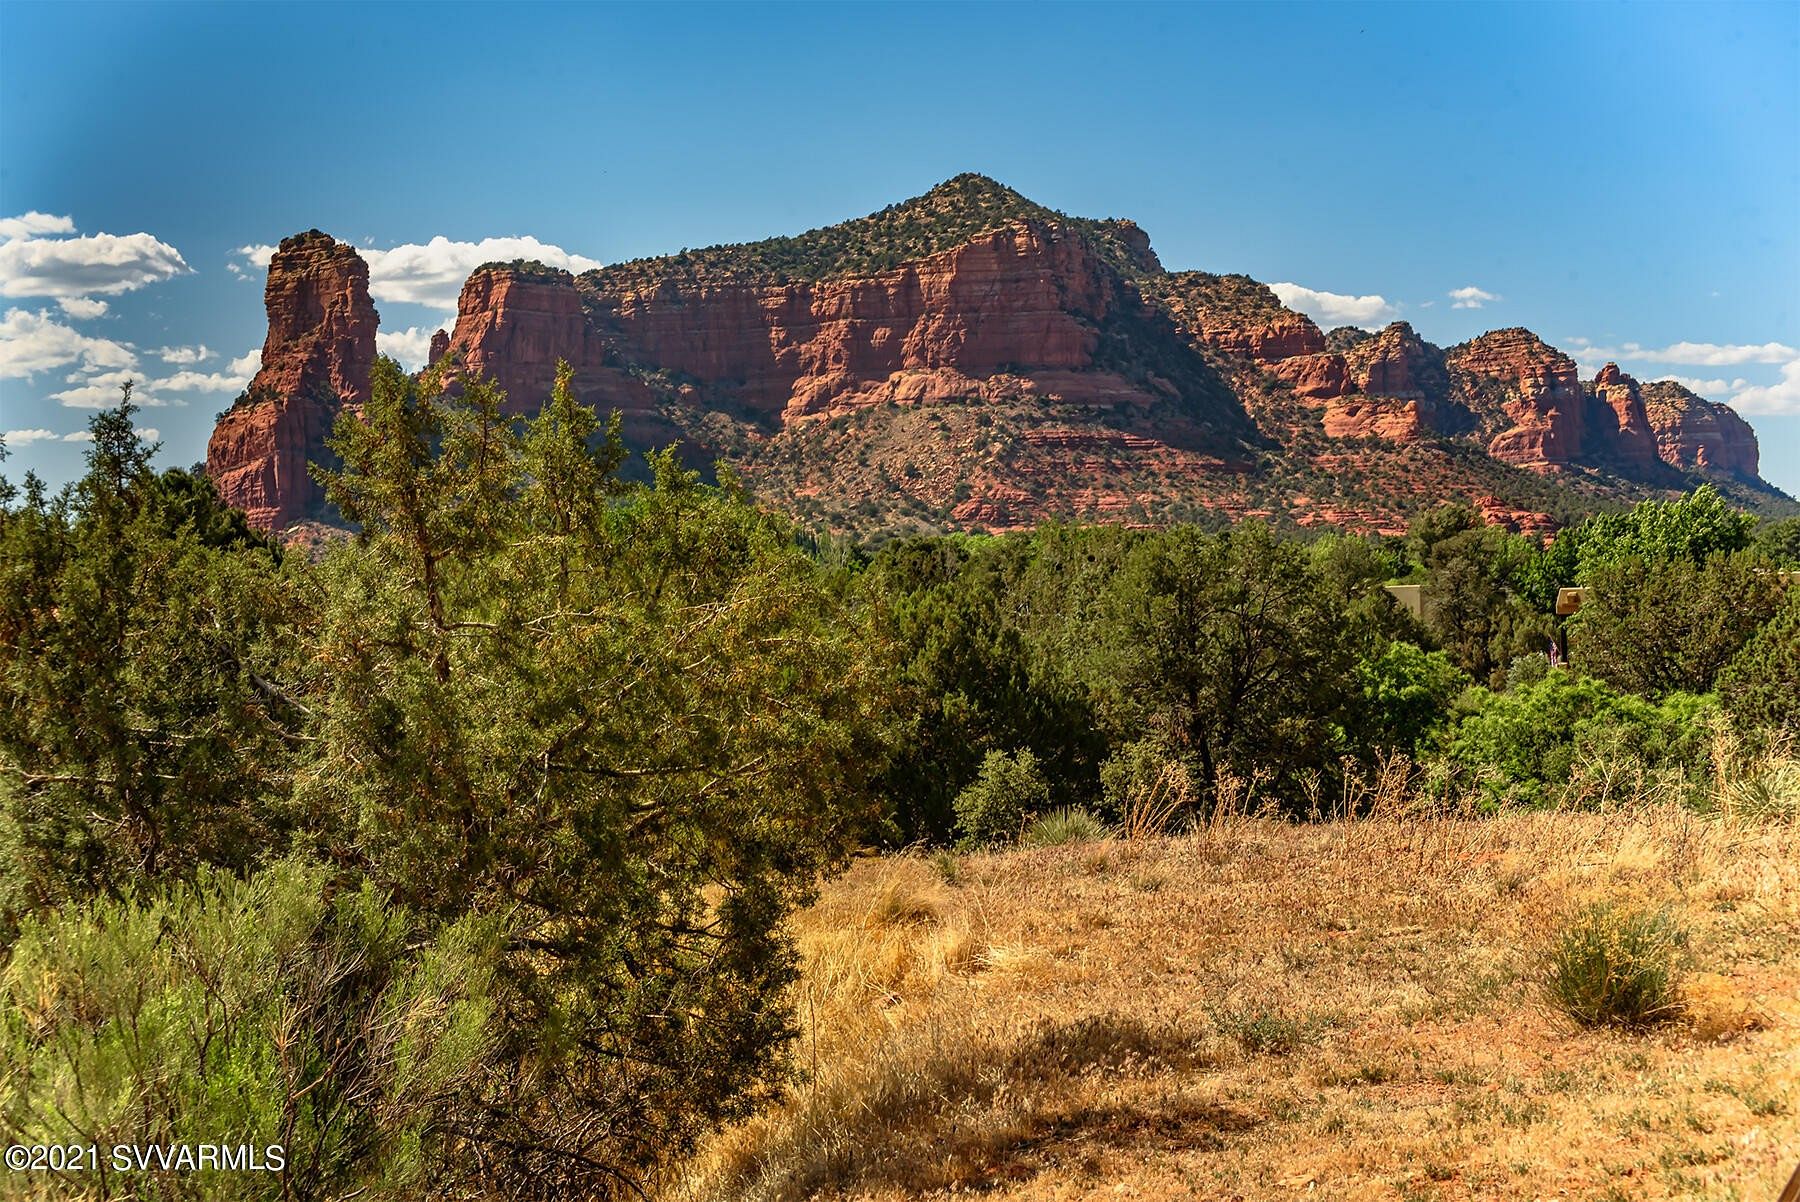 0.41 Acres of Residential Land for Sale in Sedona, Arizona